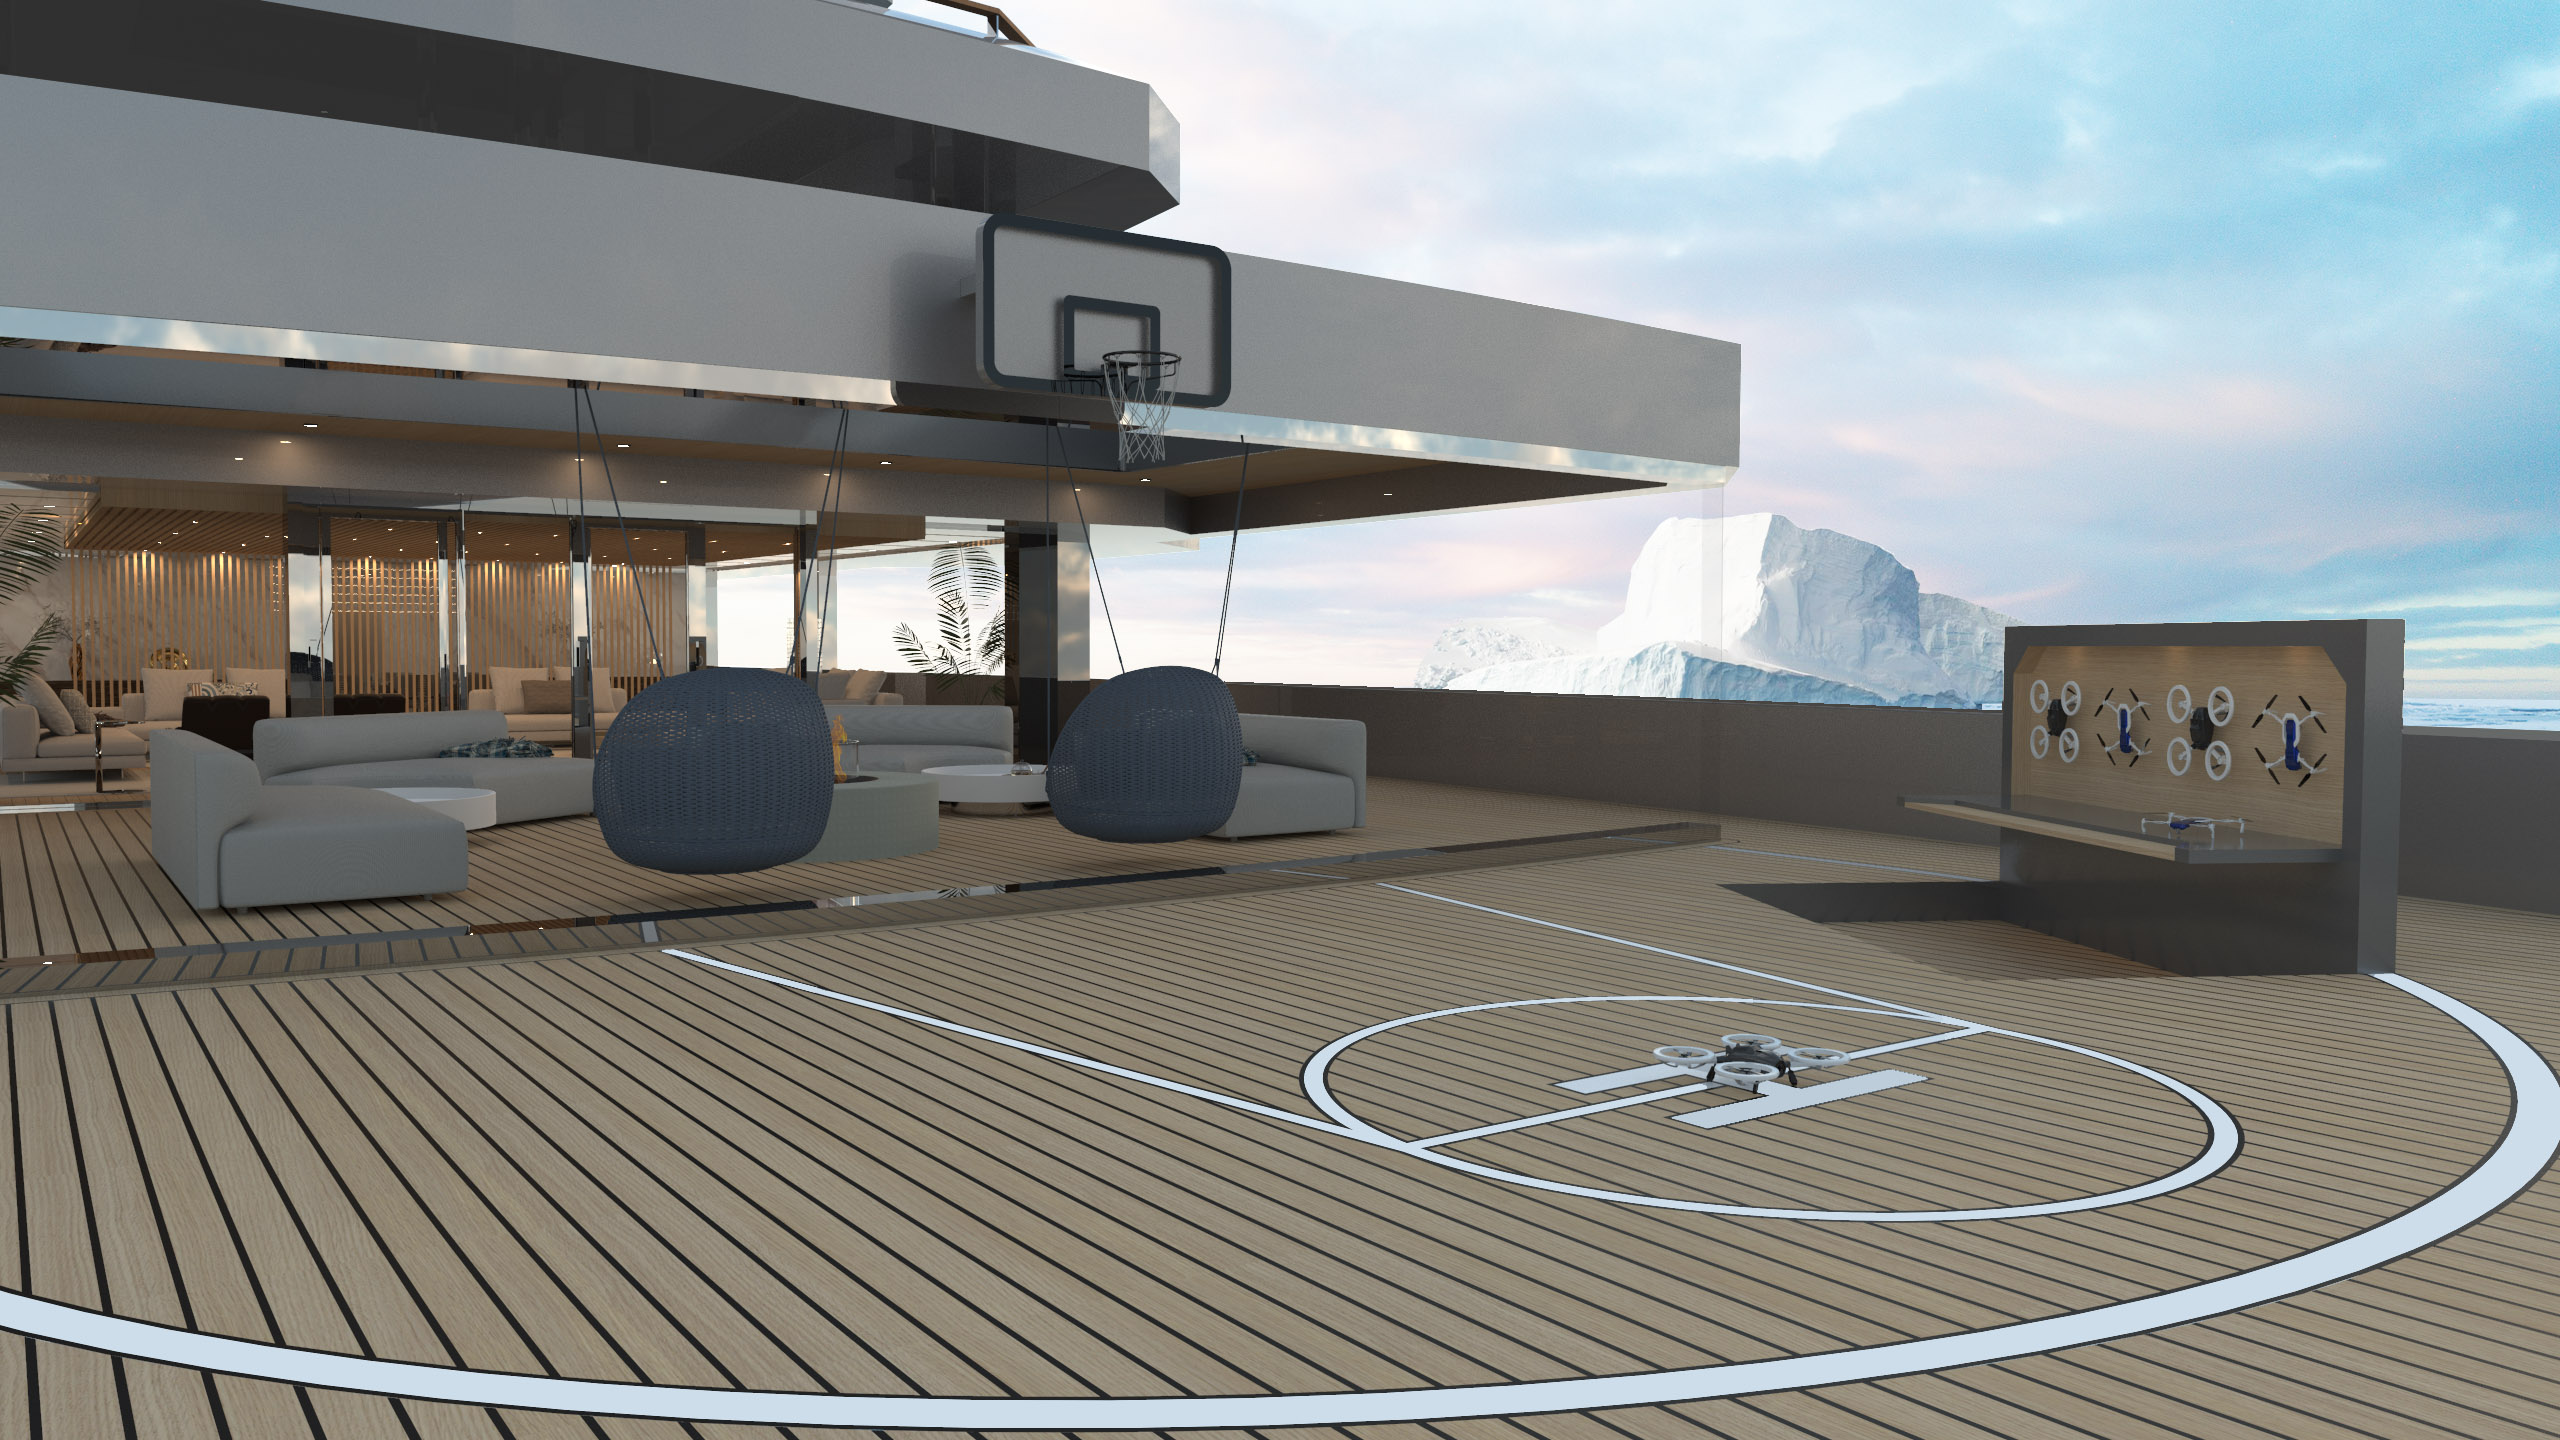 deck area on a yacht design with a basketball court